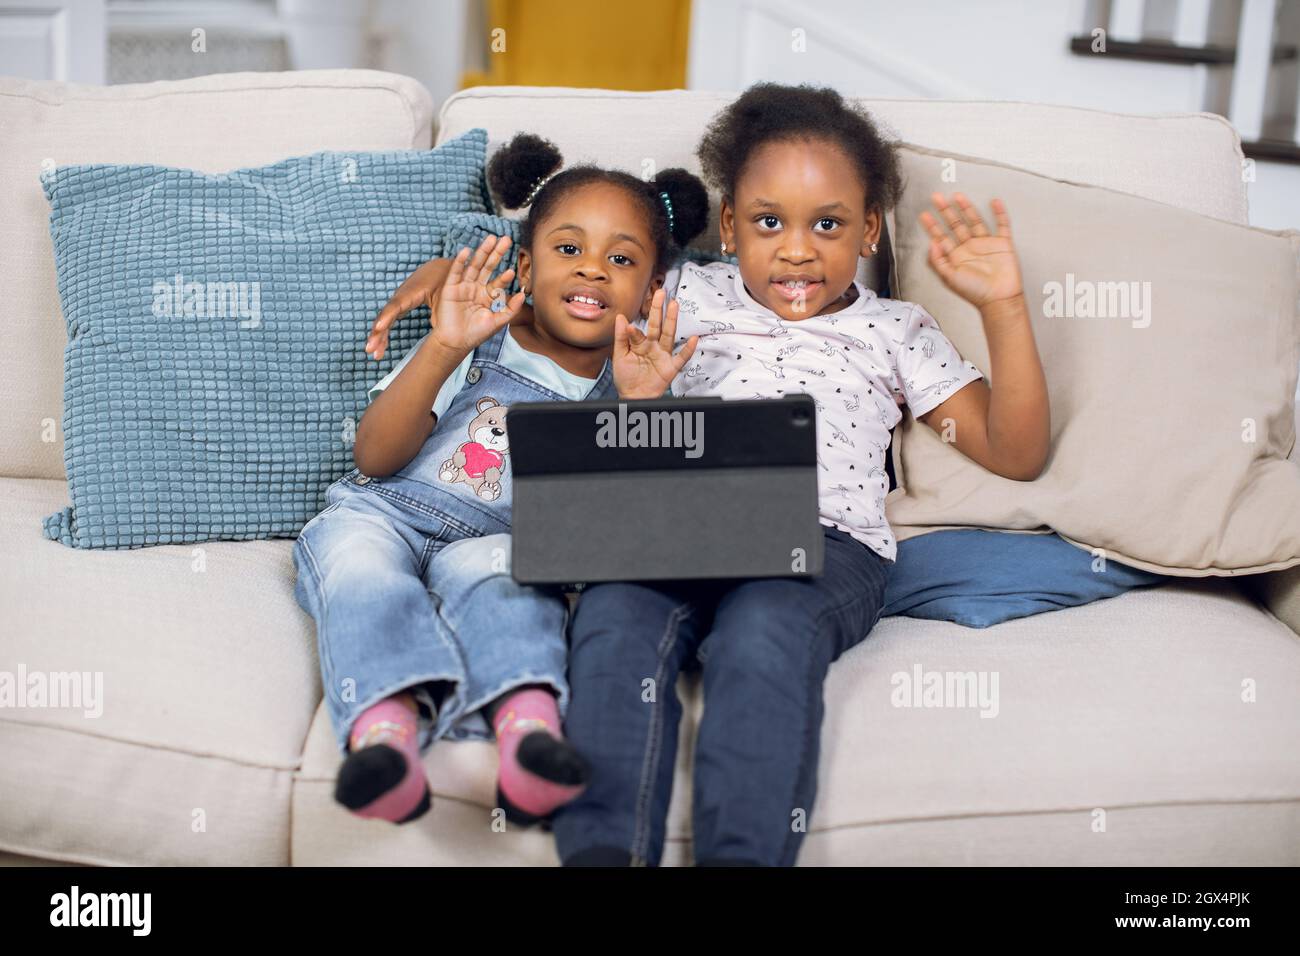 Pretty african american girls smiling and waving hands on camera sitting on cozy sofa with digital tablet. Concept of childhood and technology. Stock Photo